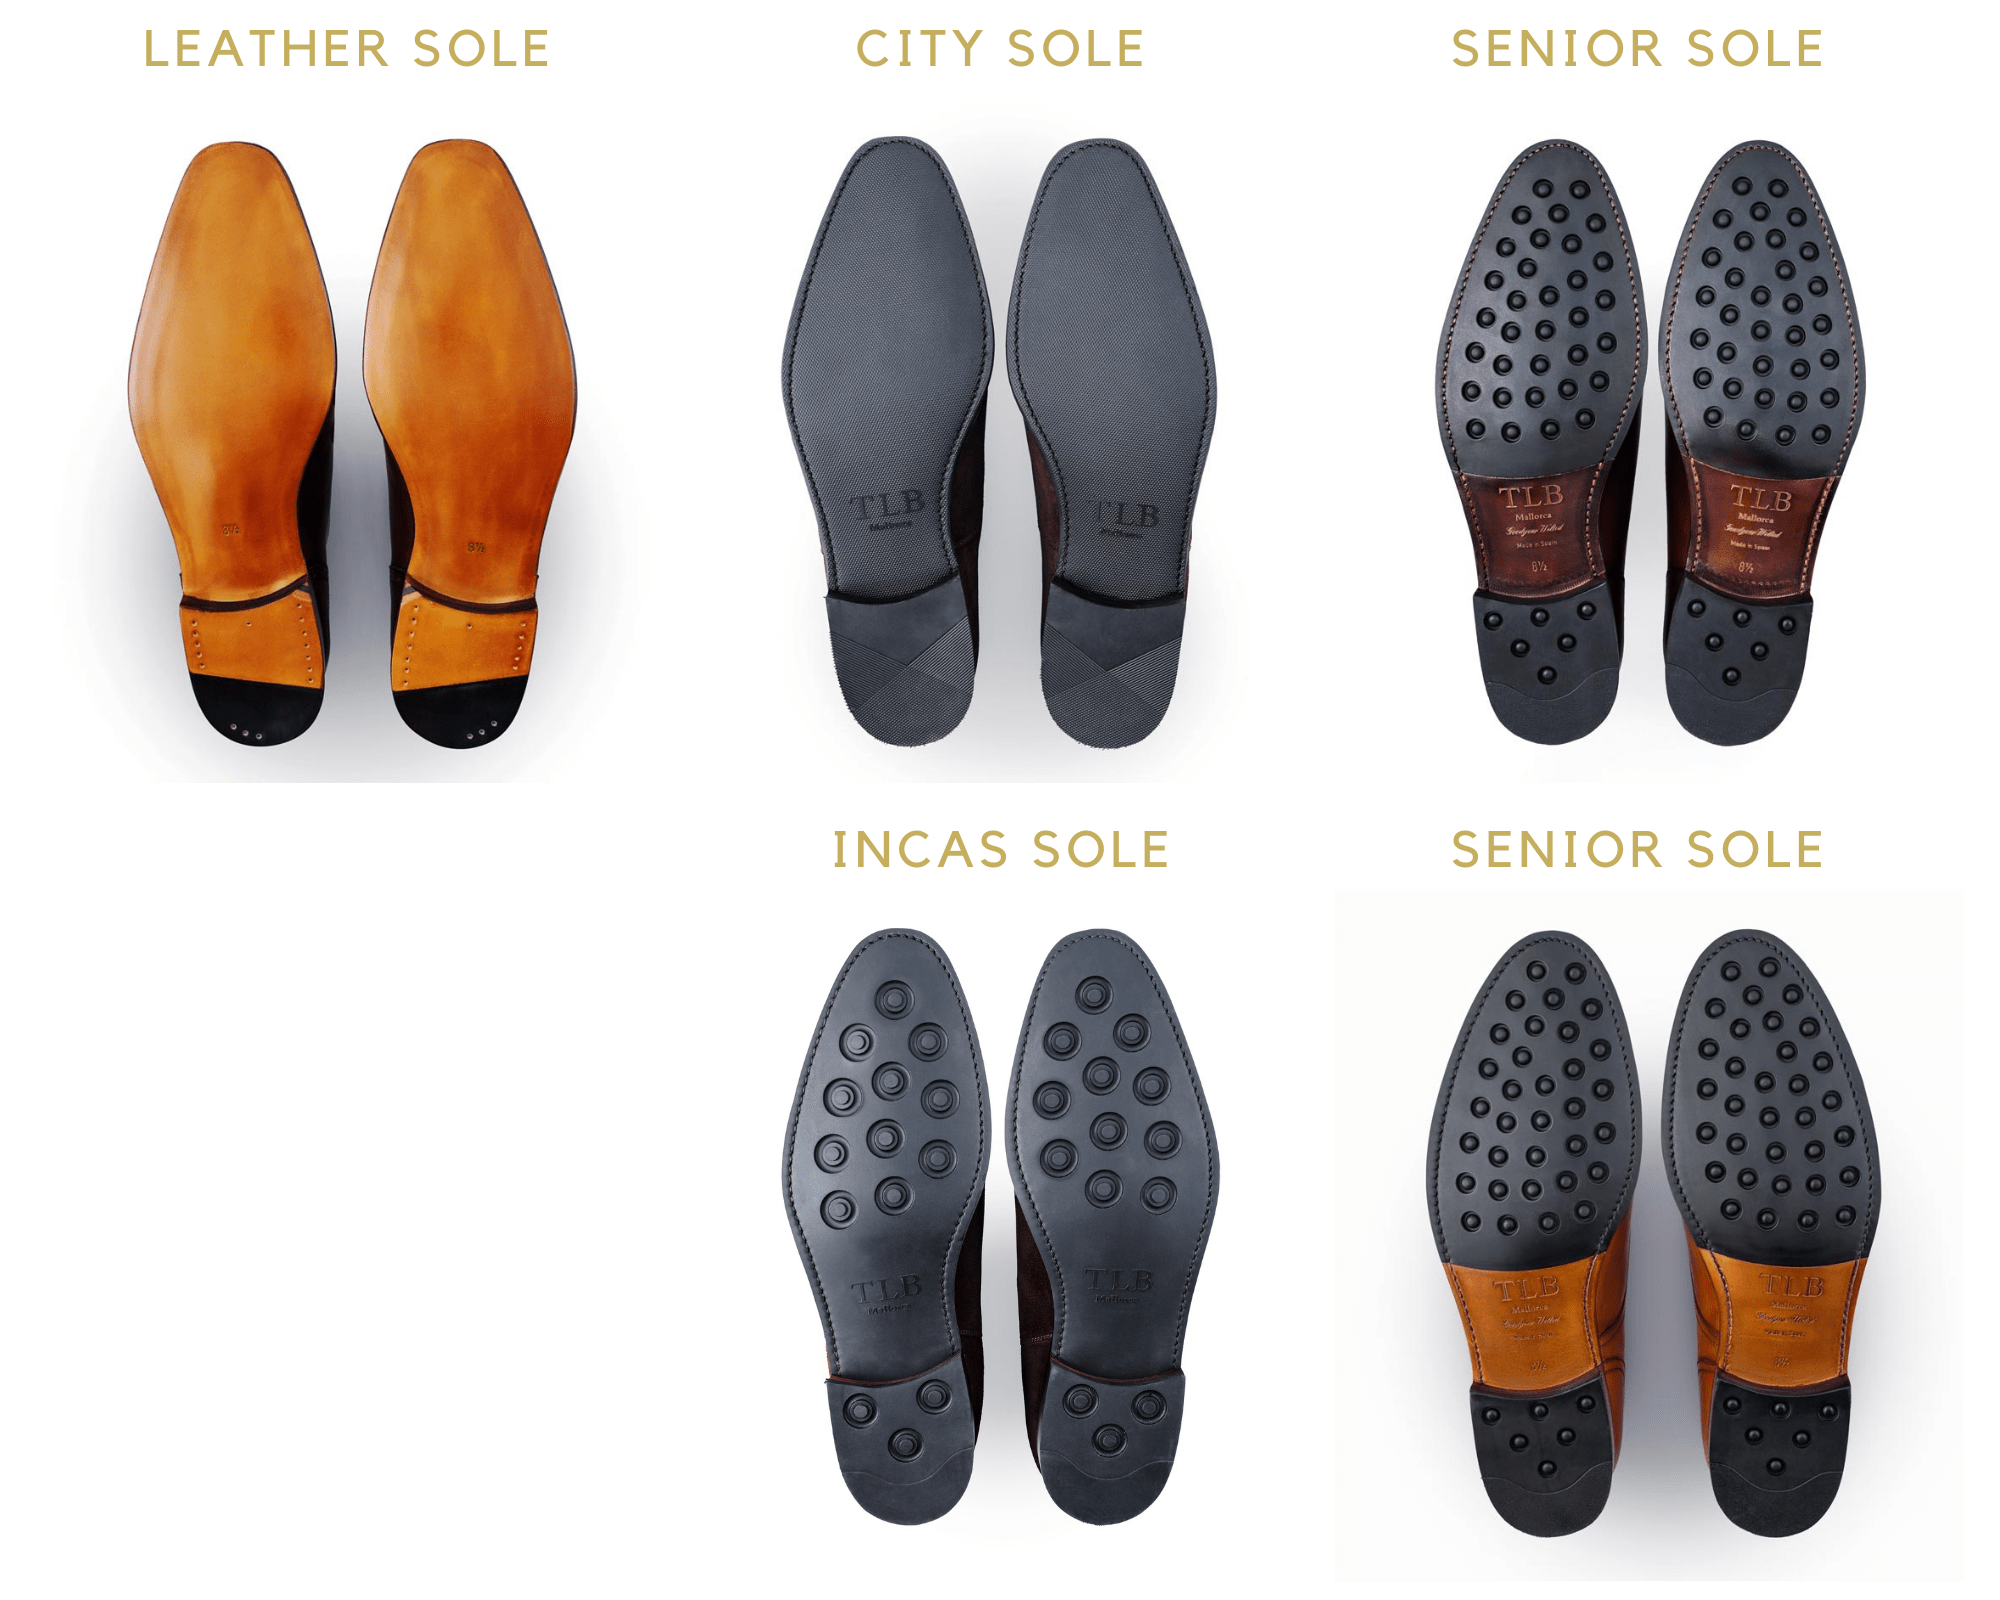 tlb mallorca main collection soles luxury shoes for men with style leather and rubber